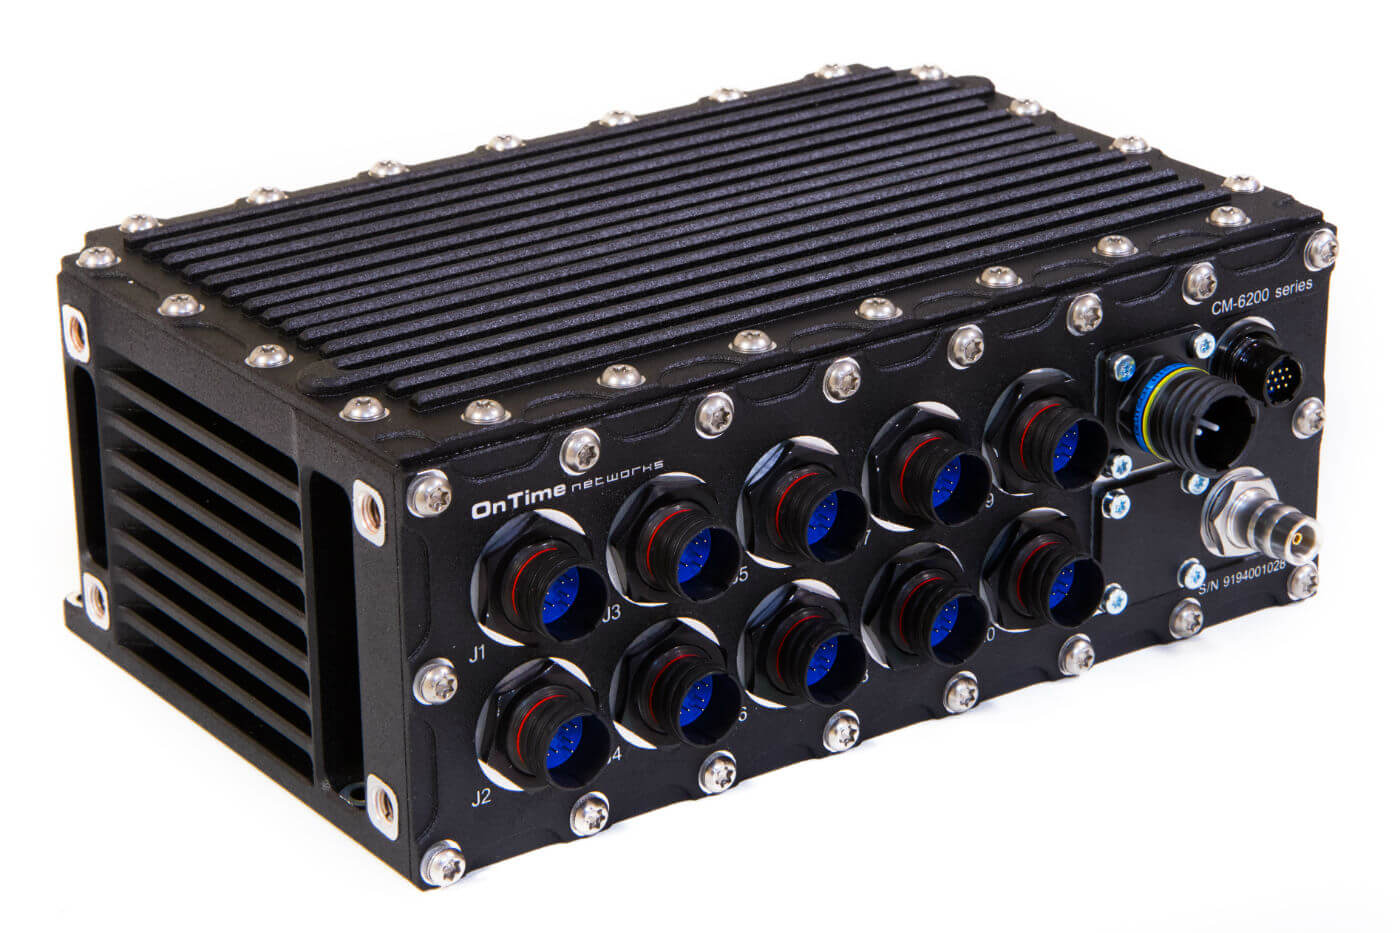 The new Cloudberry CR-6200 series is specifically designed to provide reliable, high-performance connectivity for extremely demanding size, weight and power constraints in harsh demanding environments. OnTime Networks Photo